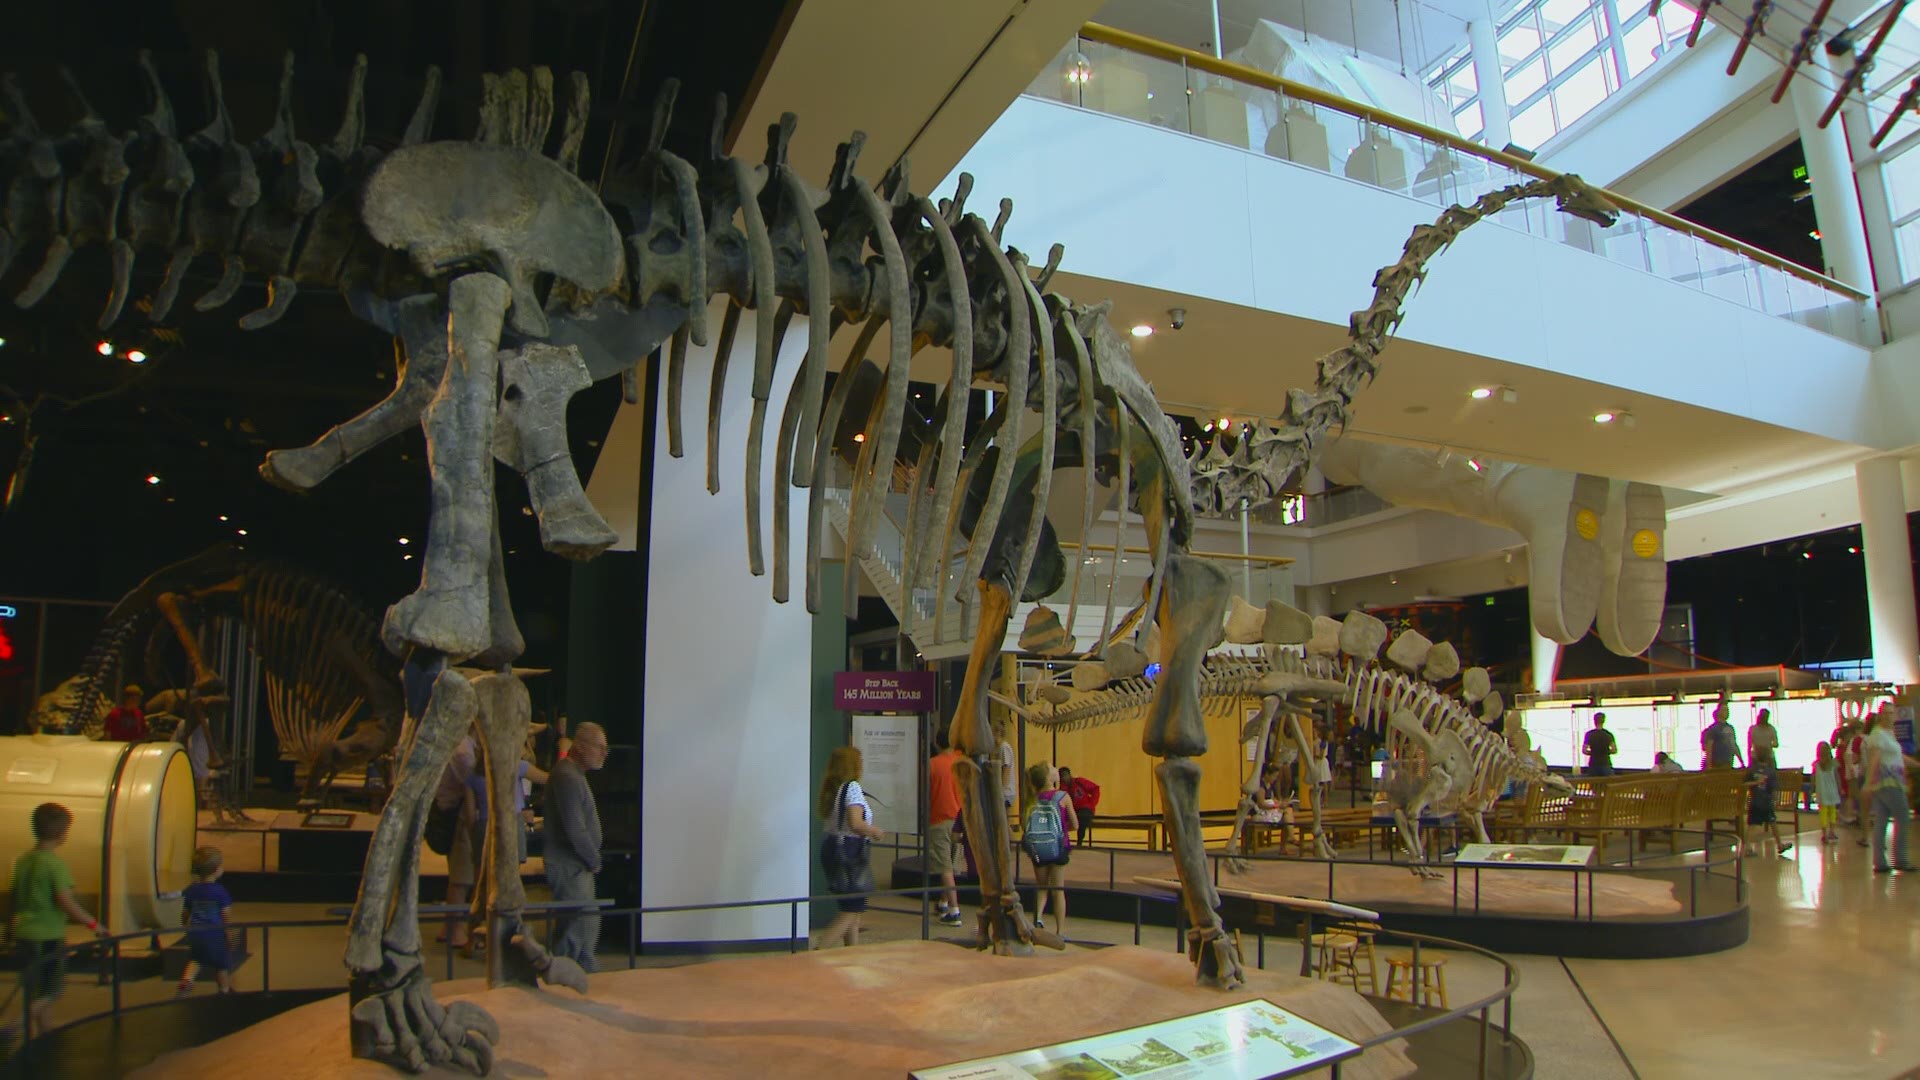 If you've counted yourself at any point among the children fascinated by the dinosaurs at the Science Museum of Minnesota this would be a good time to acknowledge some prehistoric passion.  http://kare11.tv/2vziaxJ